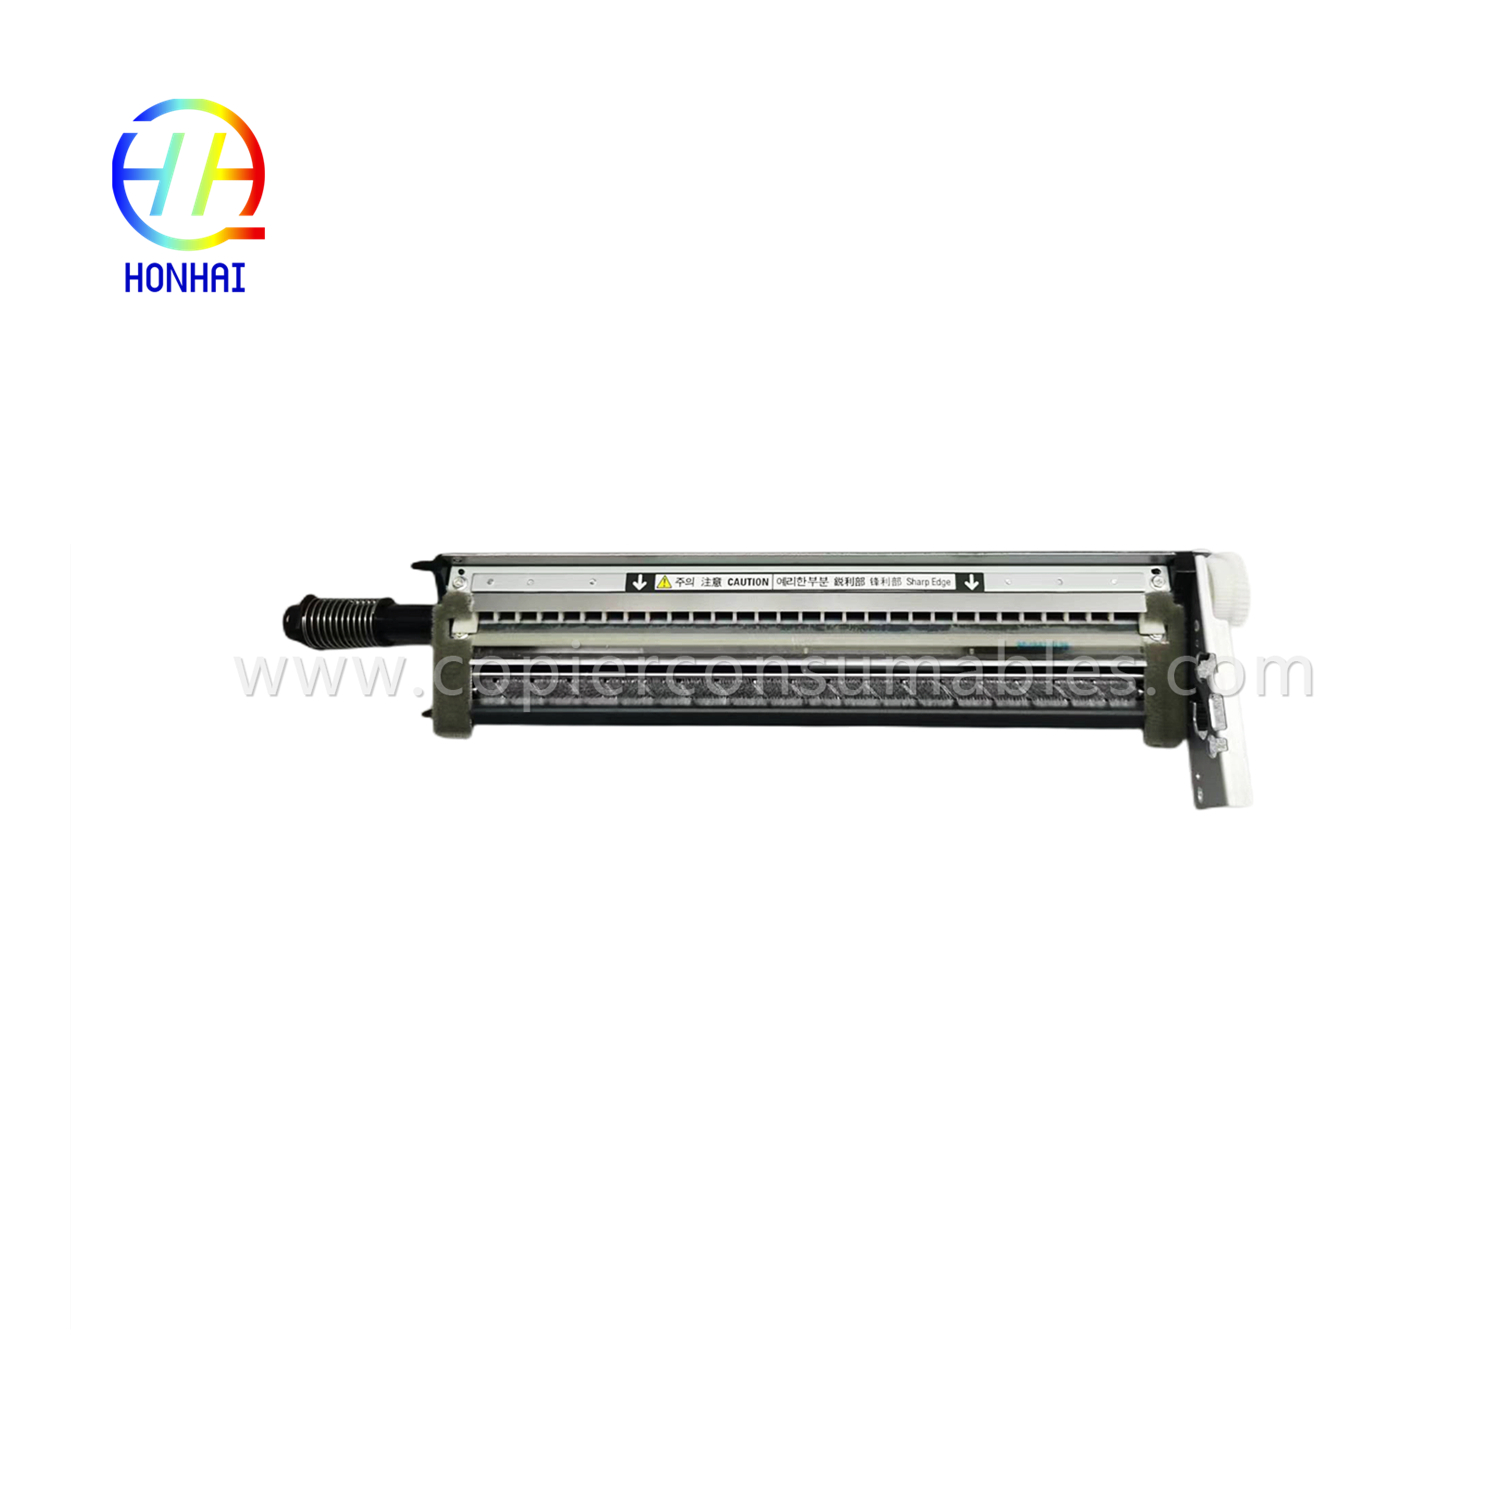 Ibt Belt Cleaner Assembly mo Xerox 700 700I 770DCP Lanu 550 560 570 C60 C70 C75 J75press (042K94561 042K94560 042K94152 042K94152 042K94151 042K94151 052K94151 052K94151 052K94561 042K94560 042K94152 042K94151 052K4K421 OEM)